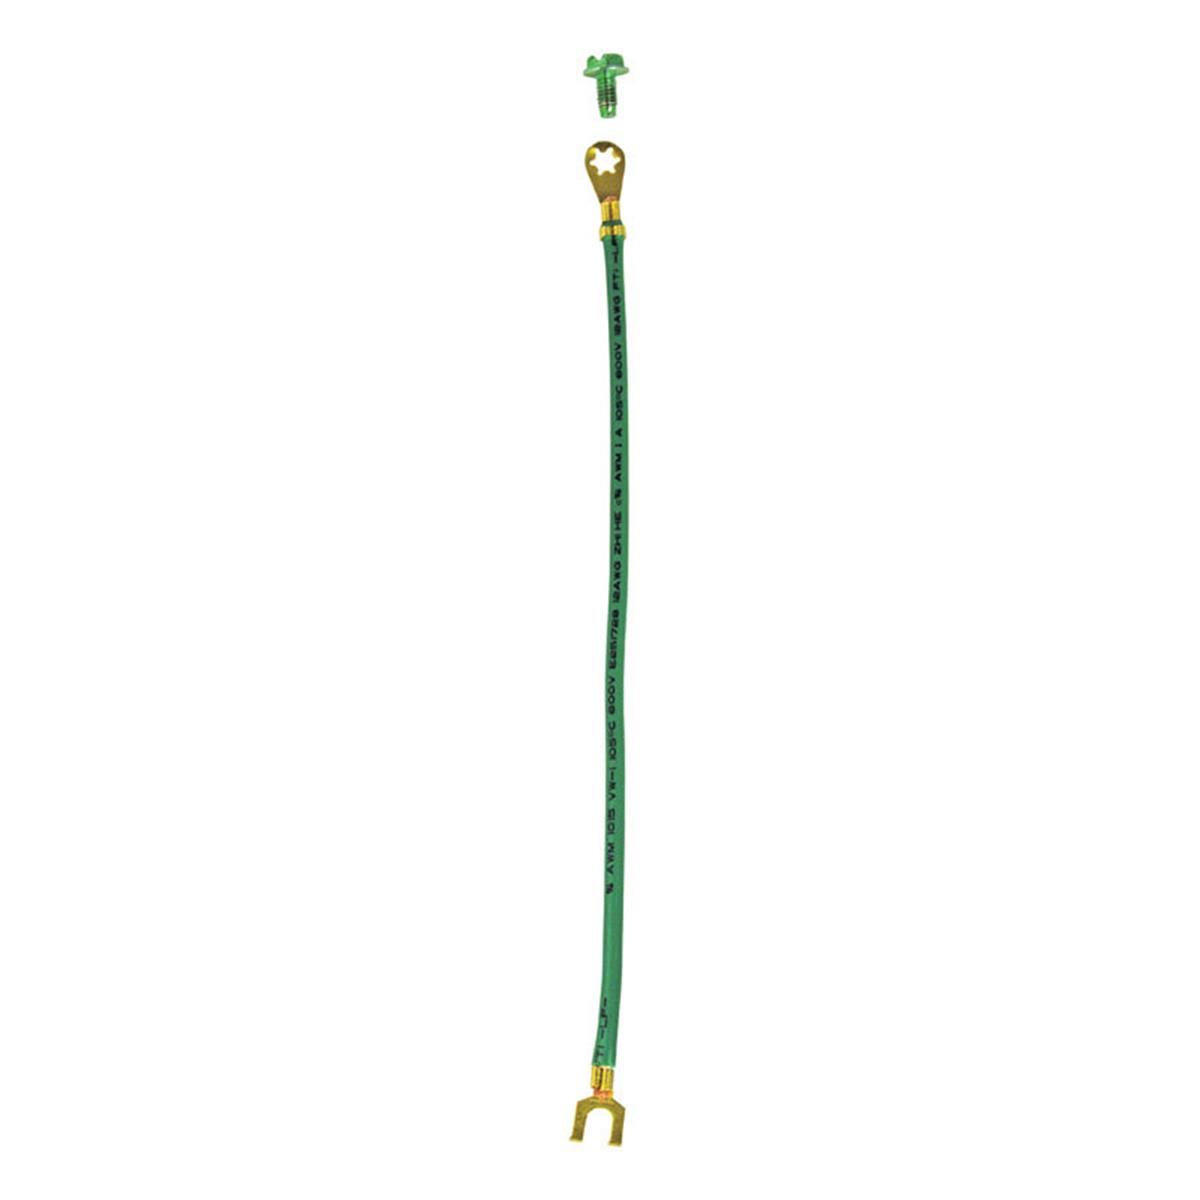 3569712 8 In. Stranded Electrical Grounding Pigtail - Pack Of 25